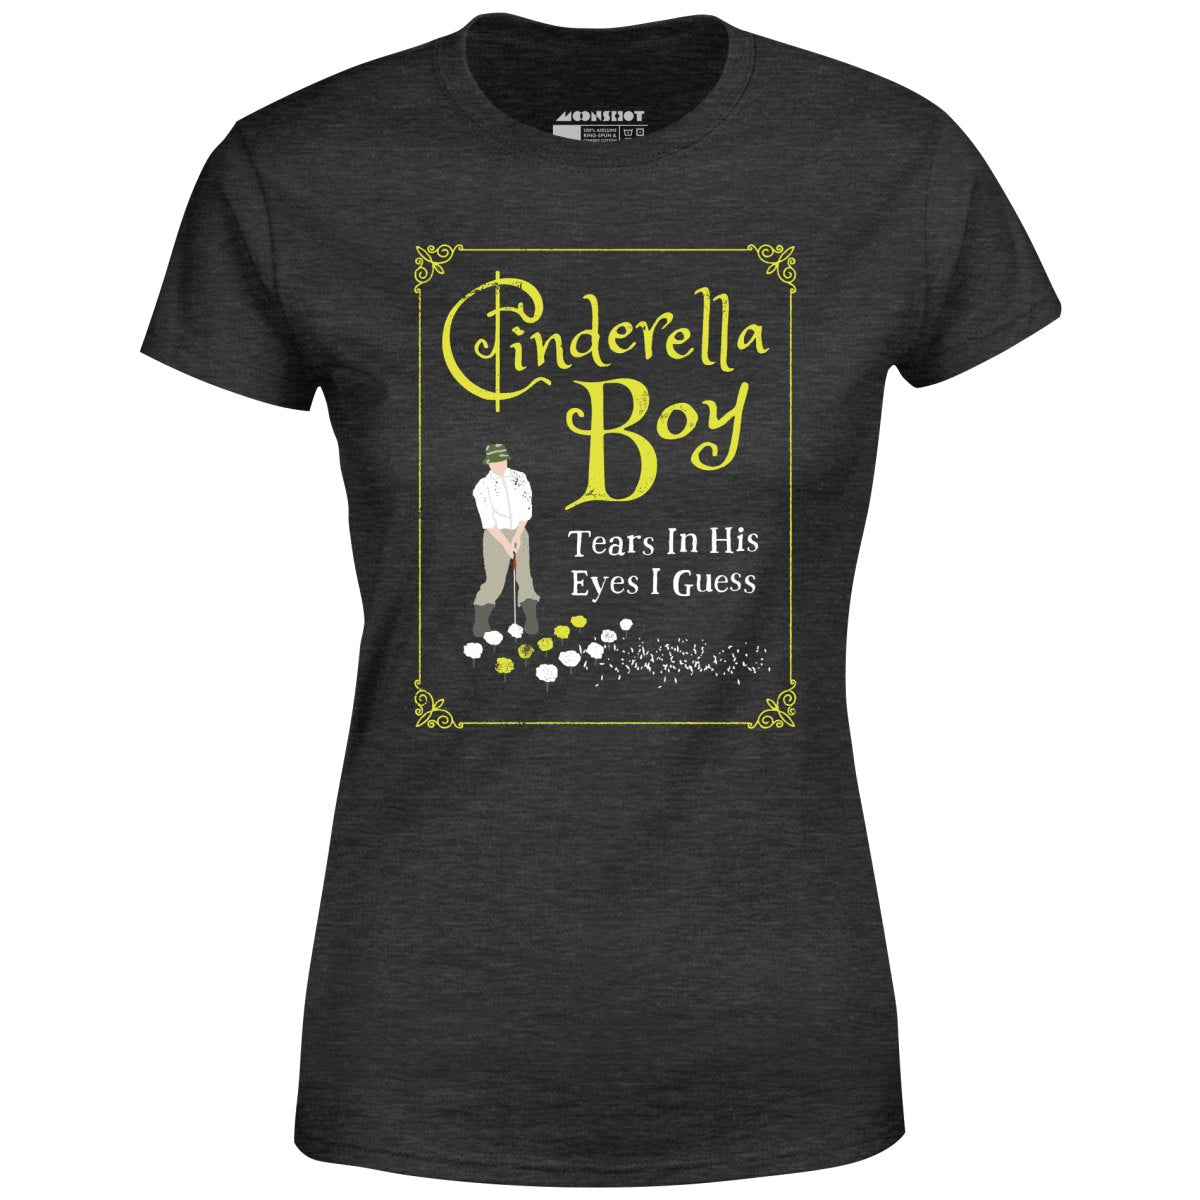 Cinderella Boy - Tears in His Eyes I Guess - Women's T-Shirt